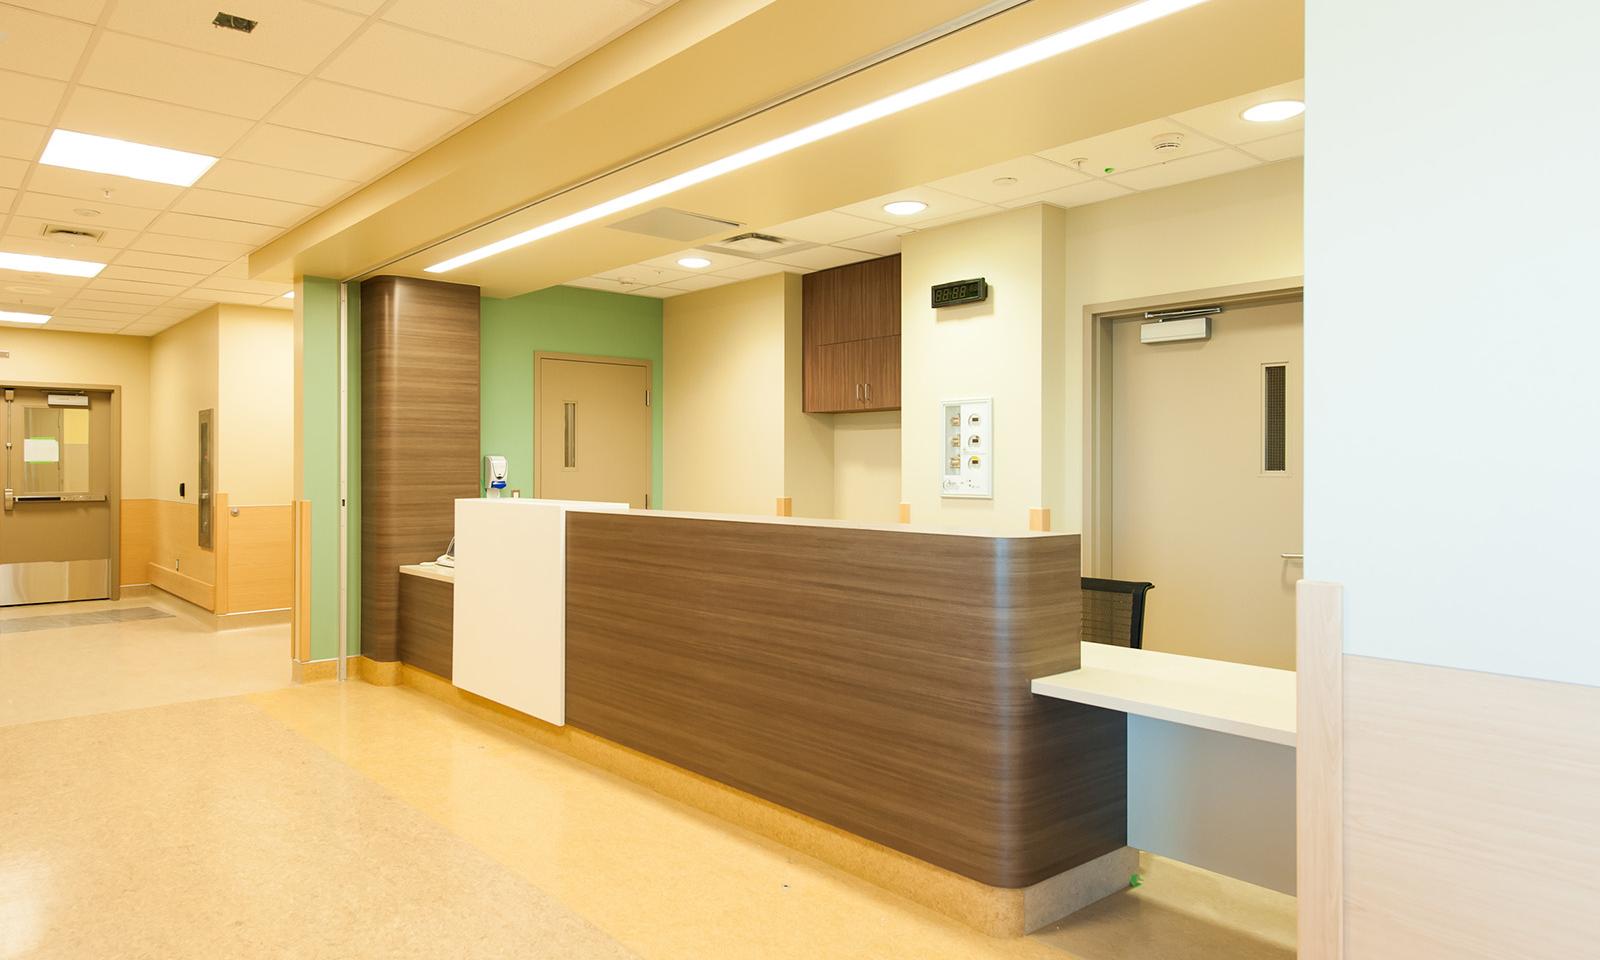 Calgary South Health. Reception desk with brown wood laminate and rounded corners. Pale green accent wall.